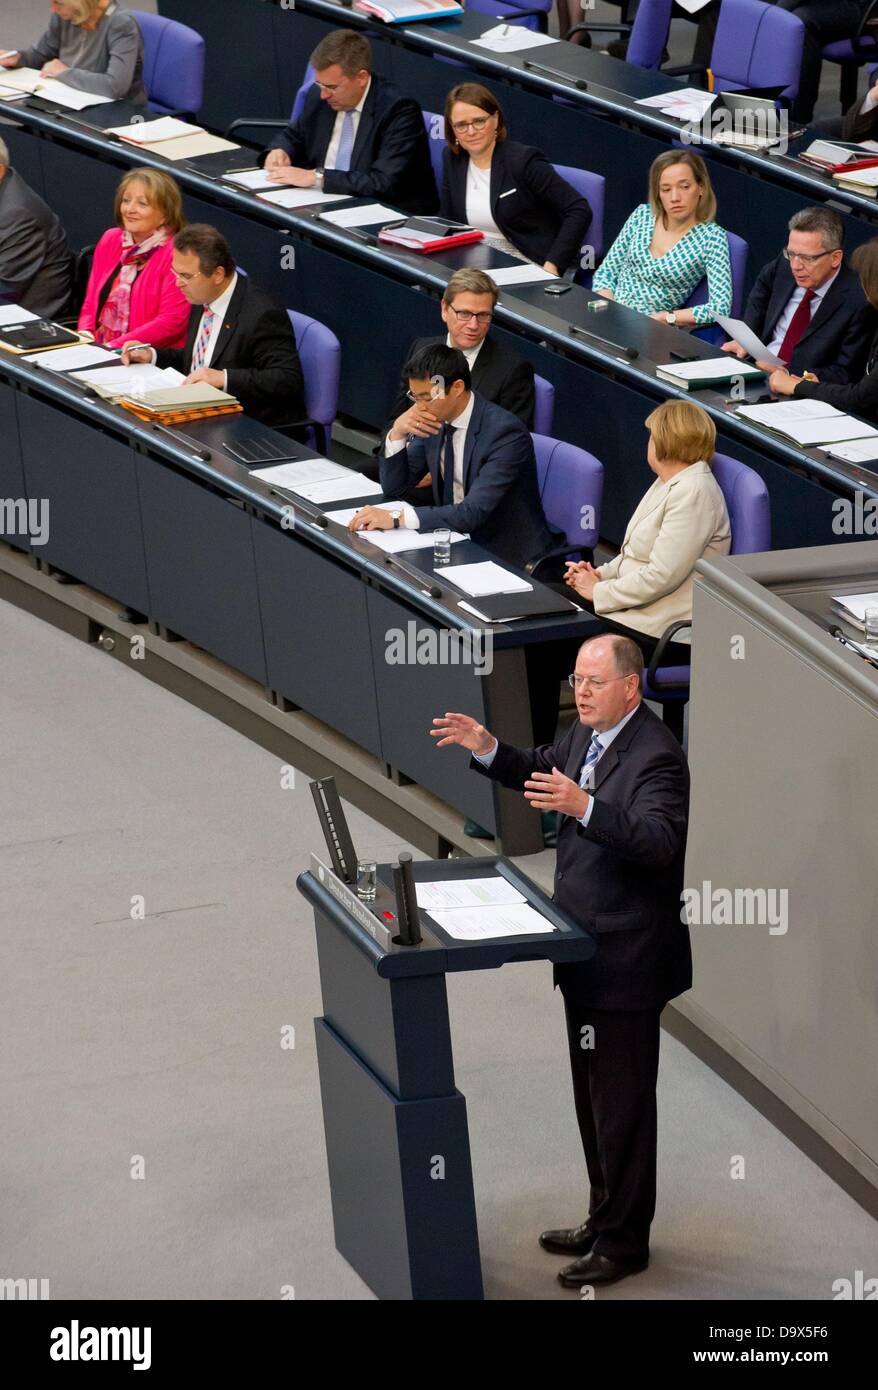 The SPD's candidate for the office of German Chancellor, Peer Steinbrueck, delivers a speech in response to the government policy statement of German Chancellor Angela Merkel (CDU, middle row, R) on the recent G8 summit and the forthcoming EU summit during a parliamentary debate in the Bundestag in Berlin, Germany, 27 June 2013. Photo: Tim Brakemeier Stock Photo